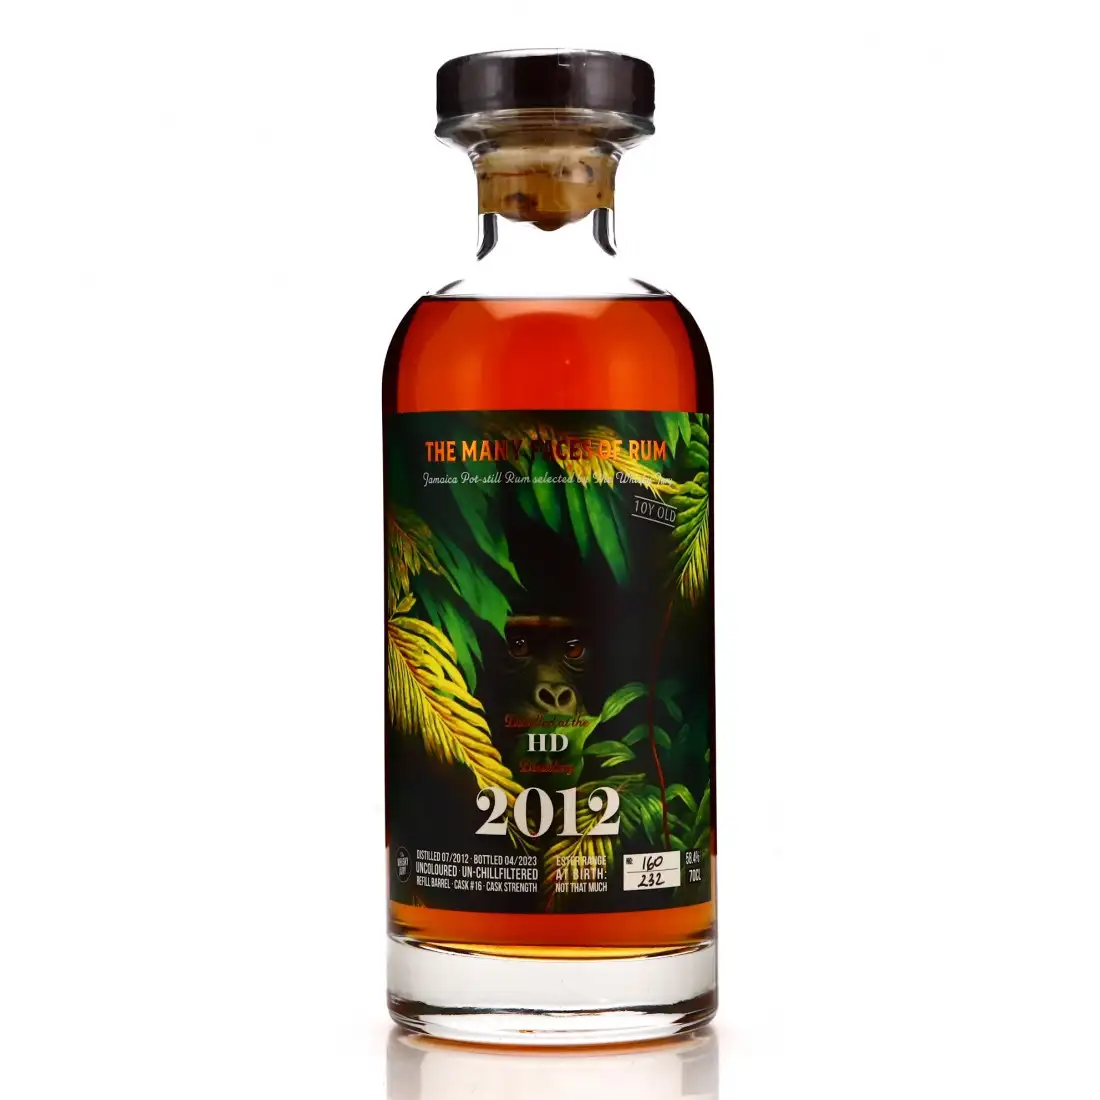 Image of the front of the bottle of the rum HD JMH3